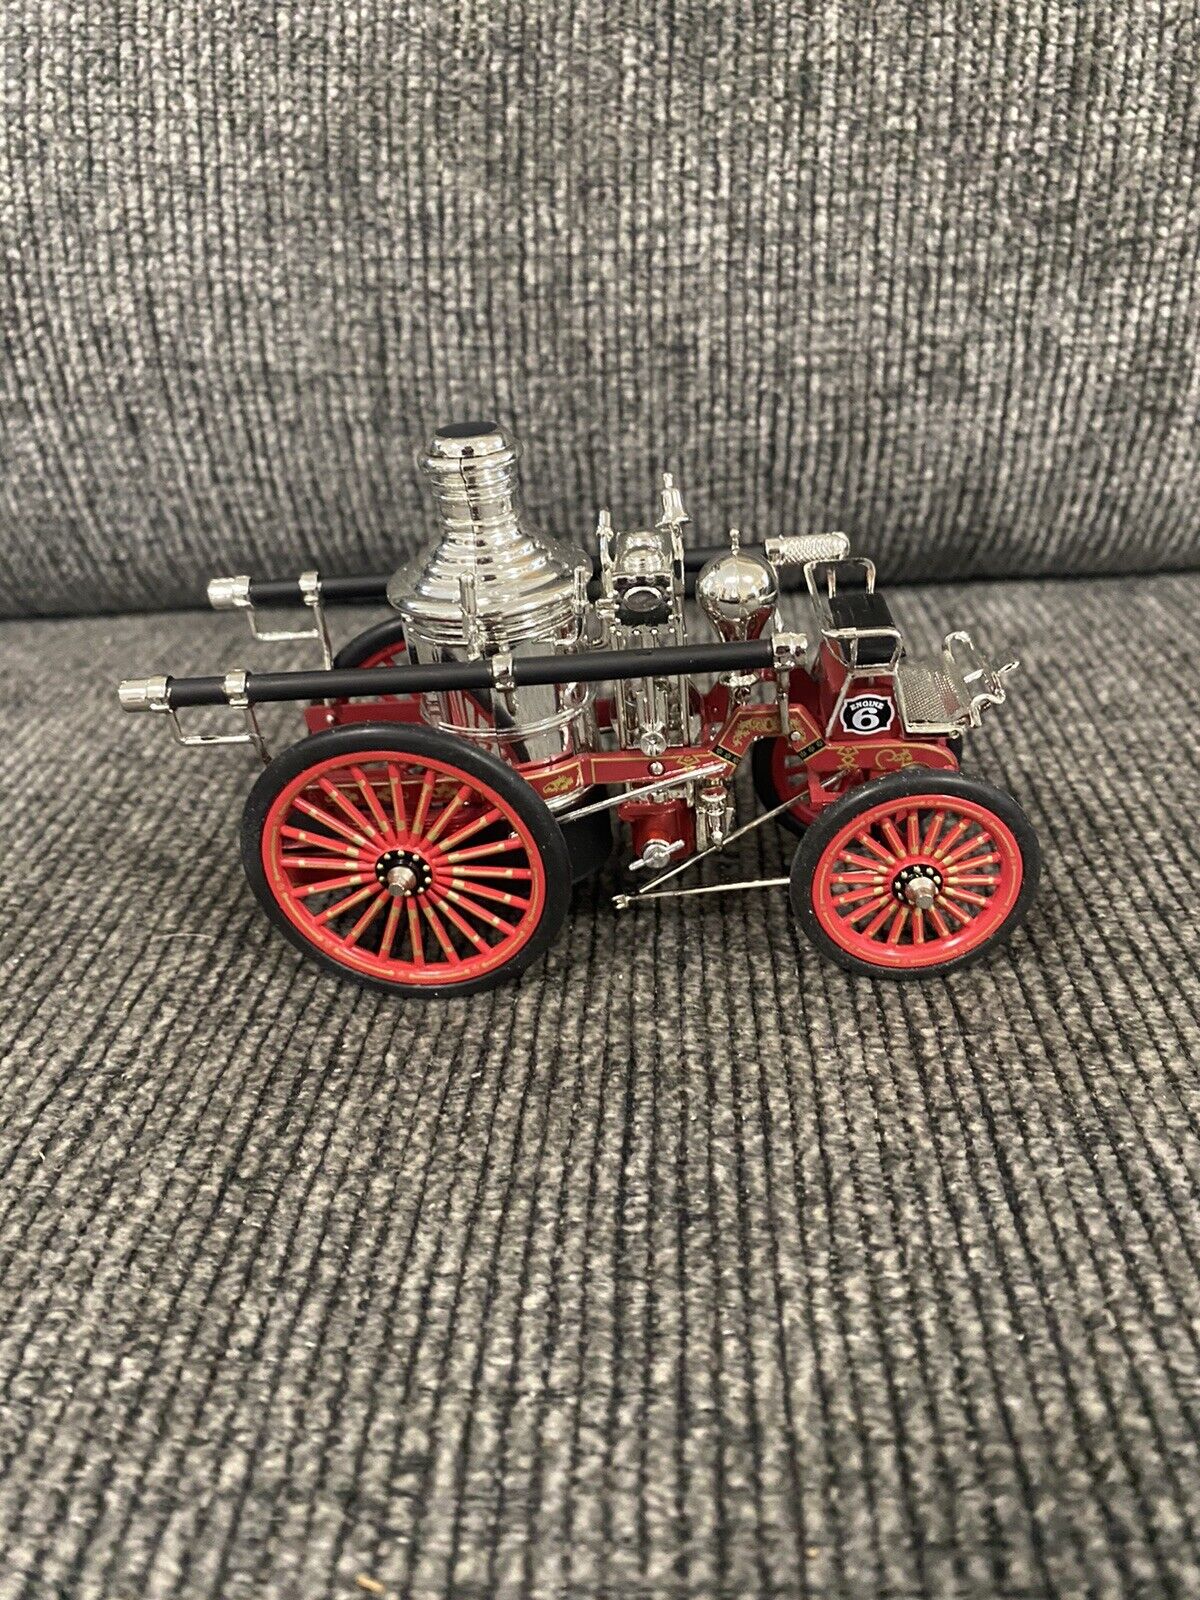 American Fire Engine Classics 1886 American LaFrance Silsby-Manning Fire Engine